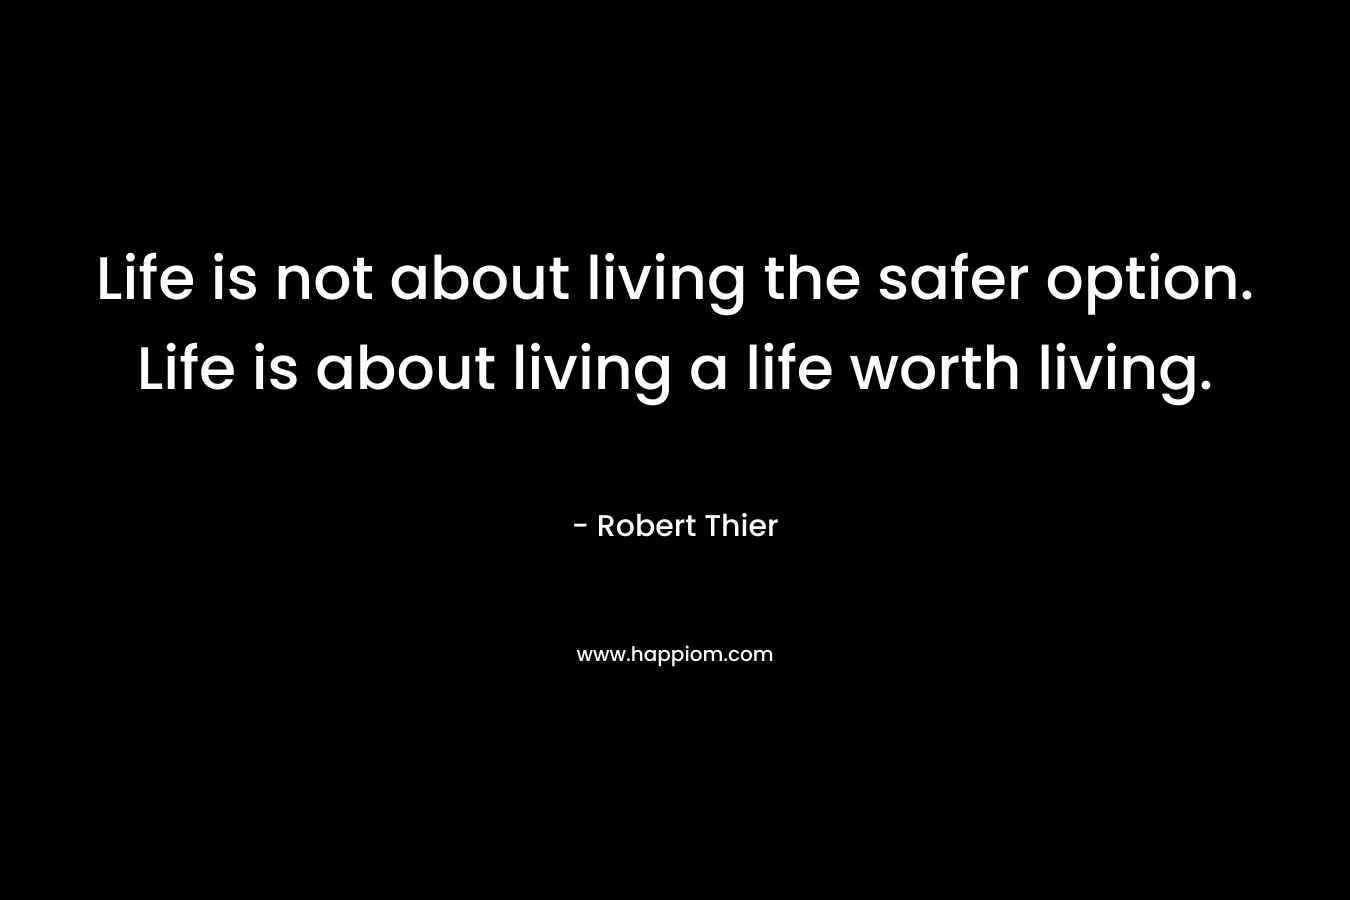 Life is not about living the safer option. Life is about living a life worth living.